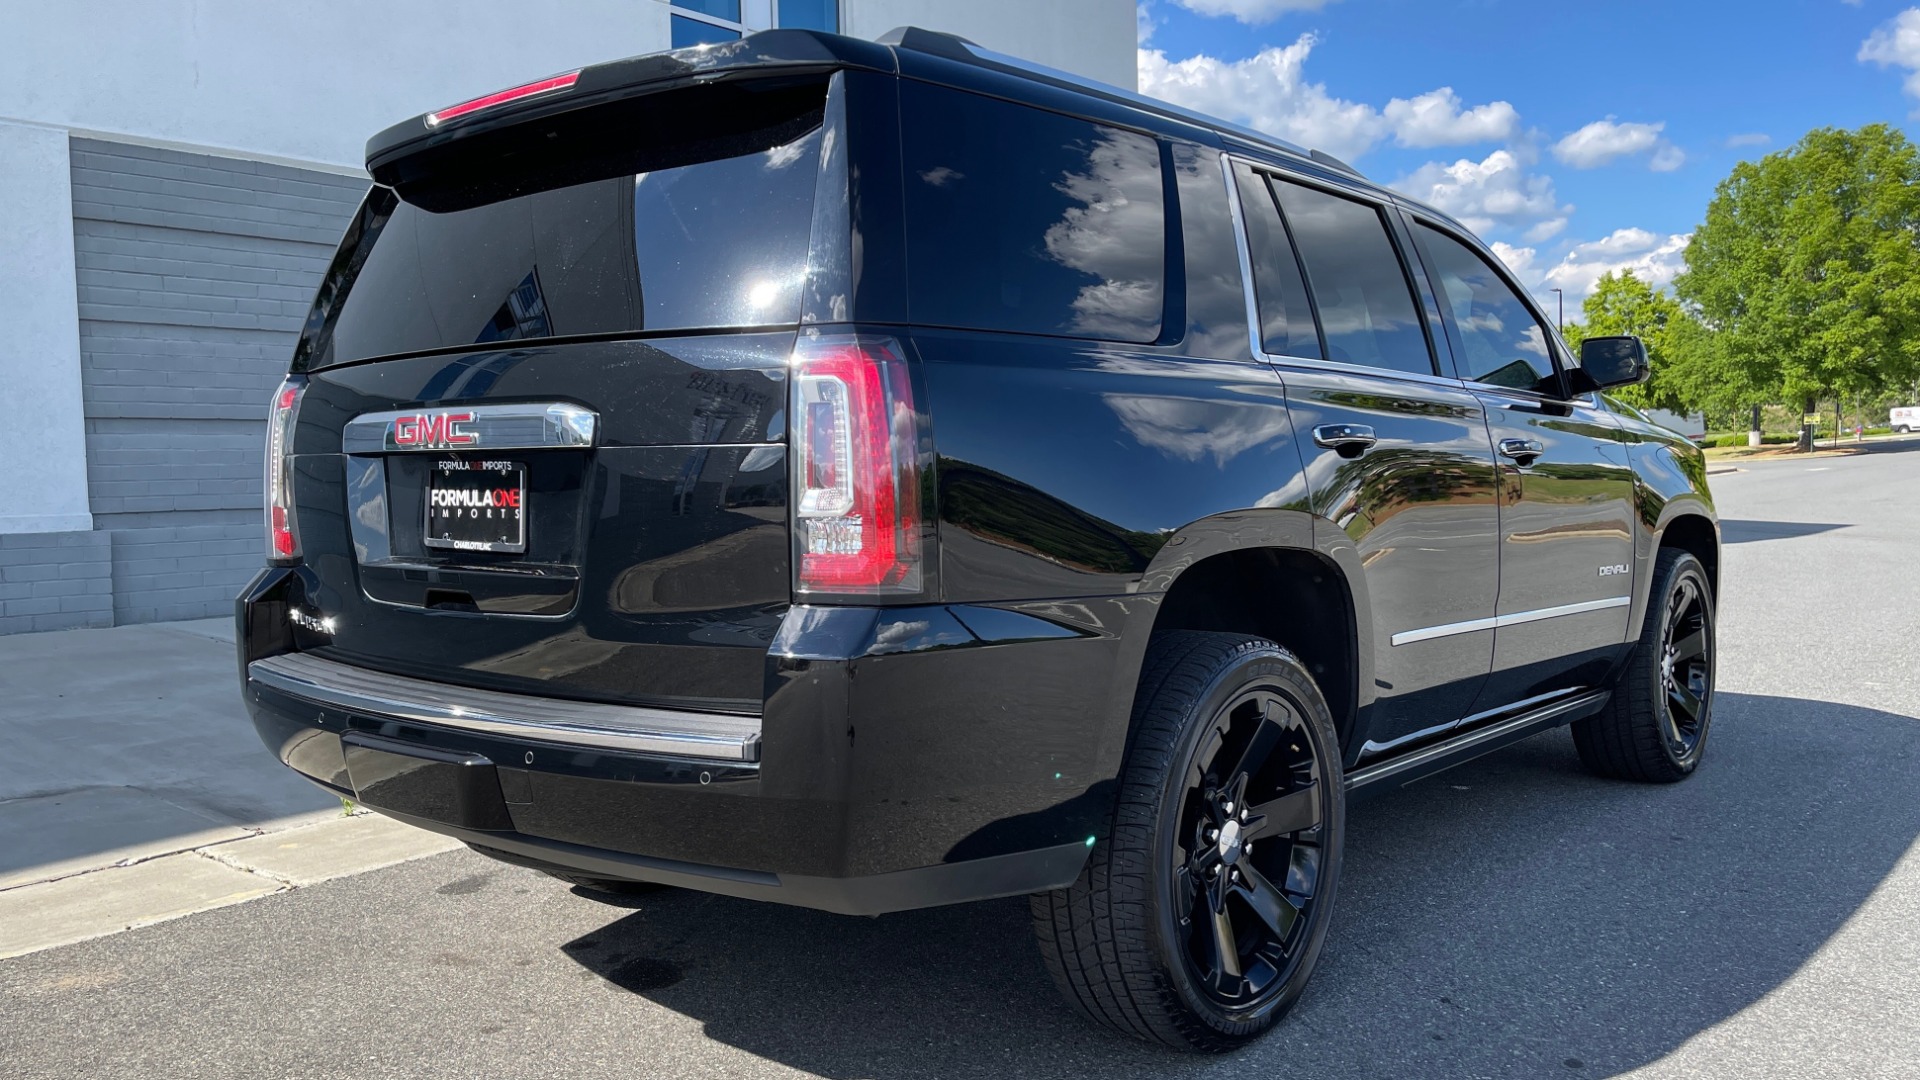 Used 2017 GMC YUKON DENALI 4WD / OPEN ROAD / NAV / ENTERTAINMENT / SUNROOF / ADAPT CRUISE for sale Sold at Formula Imports in Charlotte NC 28227 2